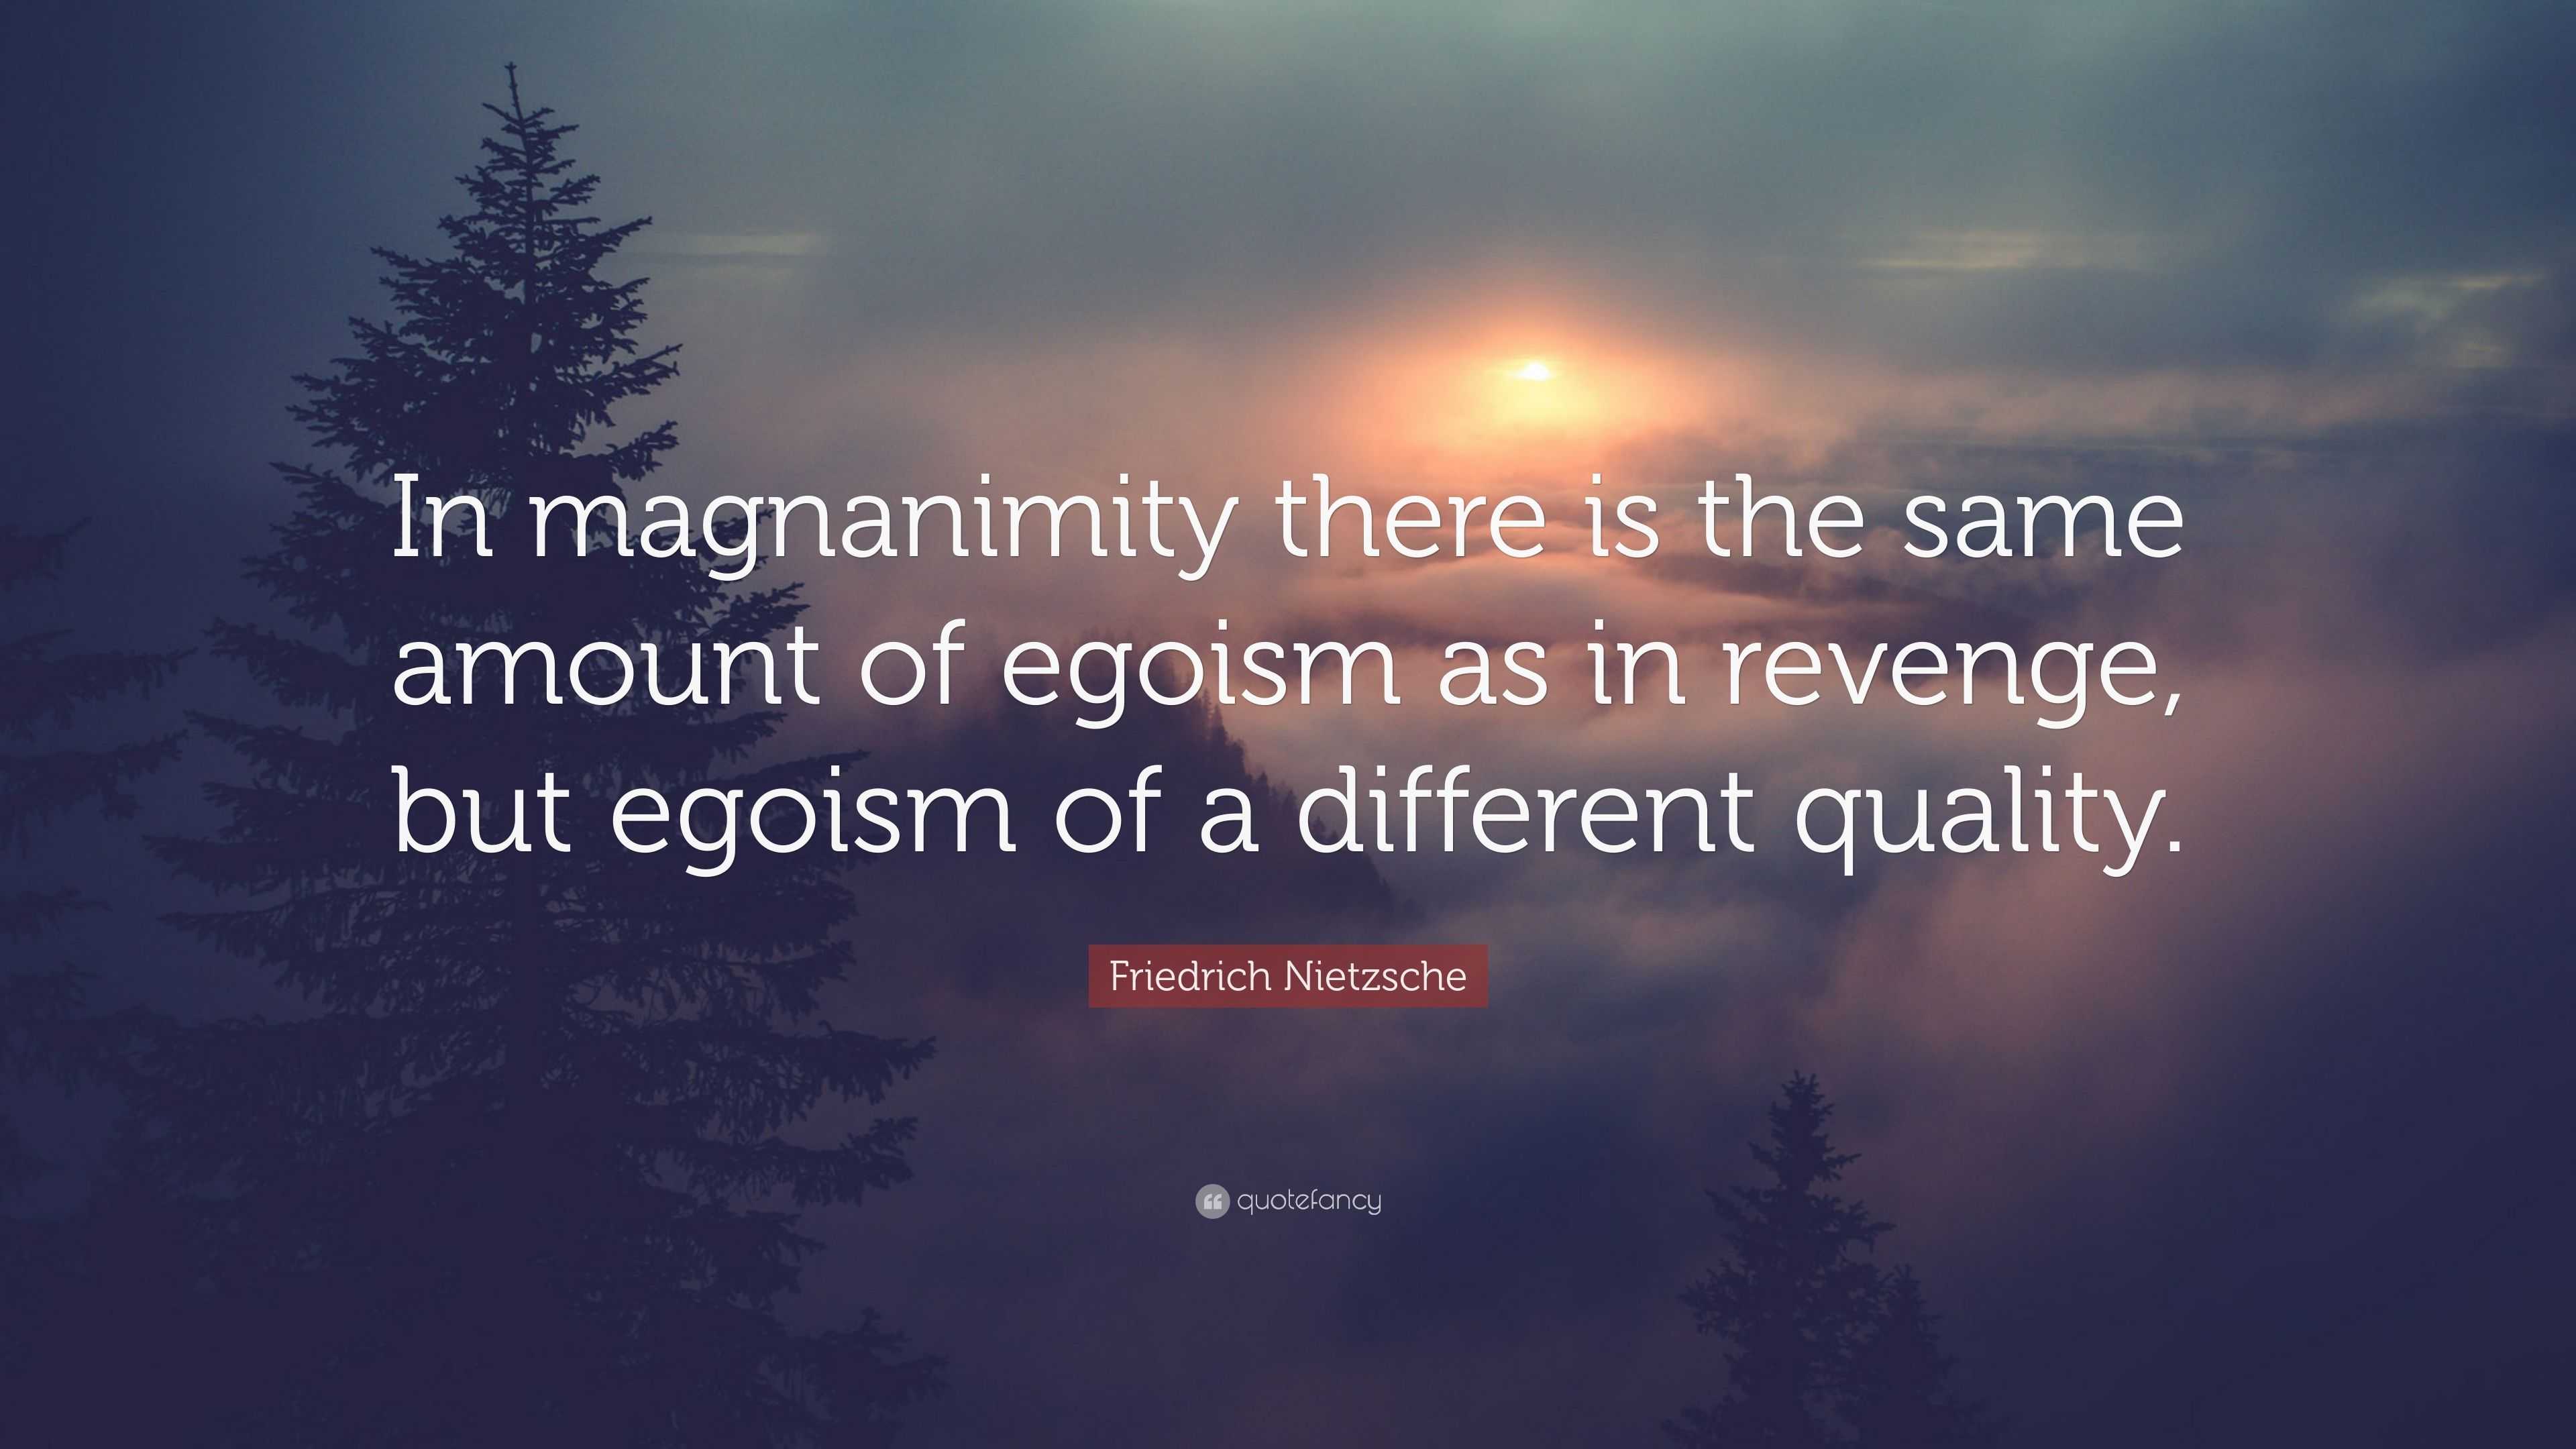 Friedrich Nietzsche Quote: “In magnanimity there is the same amount of ...